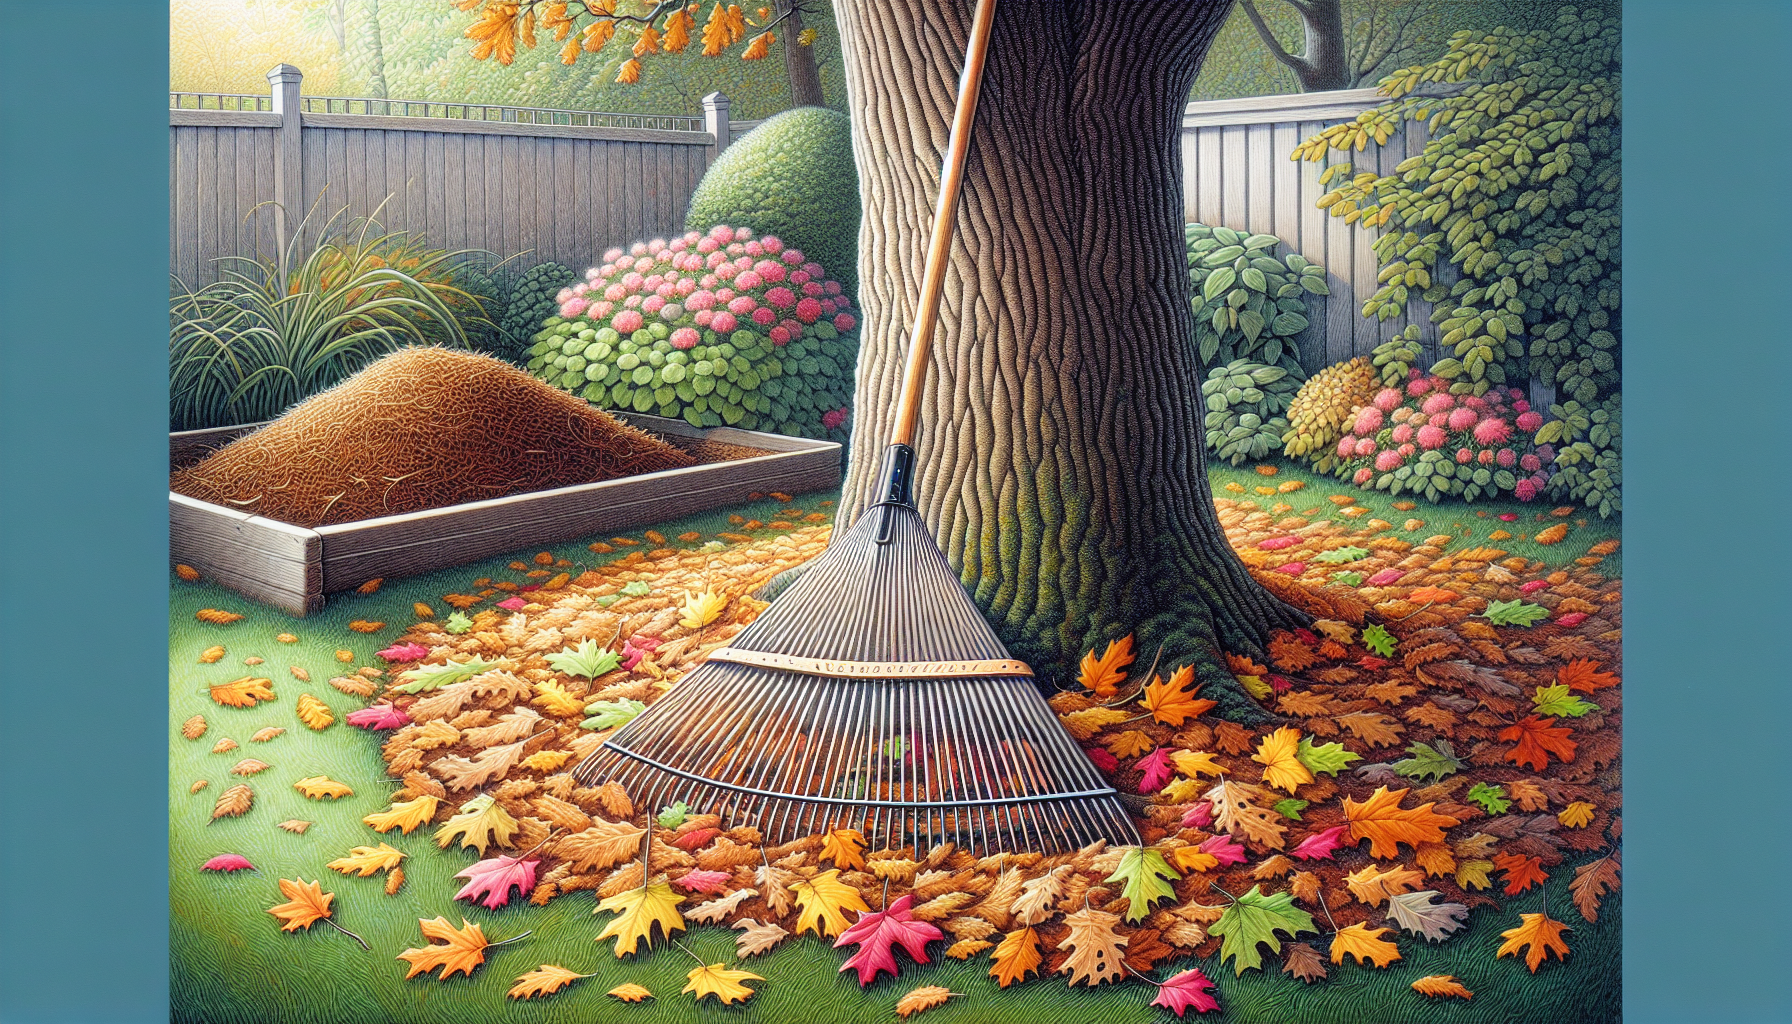 Illustration of a healthy yard with fallen leaves and a rake